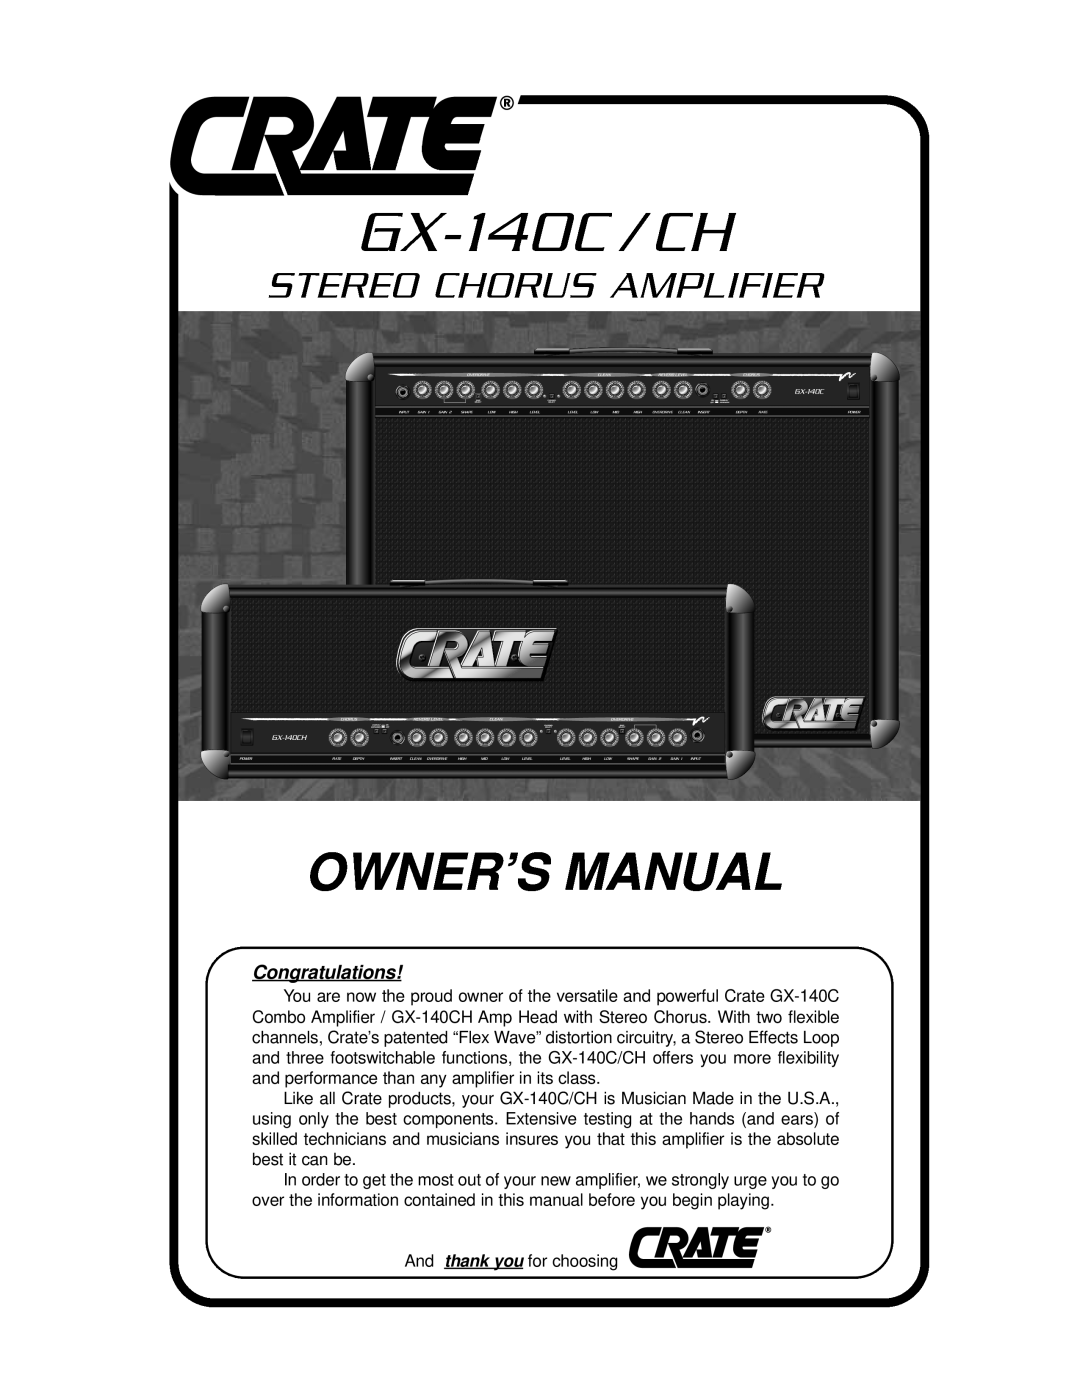 Crate Amplifiers GX-140CH owner manual GX-140C /CH, Stereo Chorus Amplifier, Congratulations 